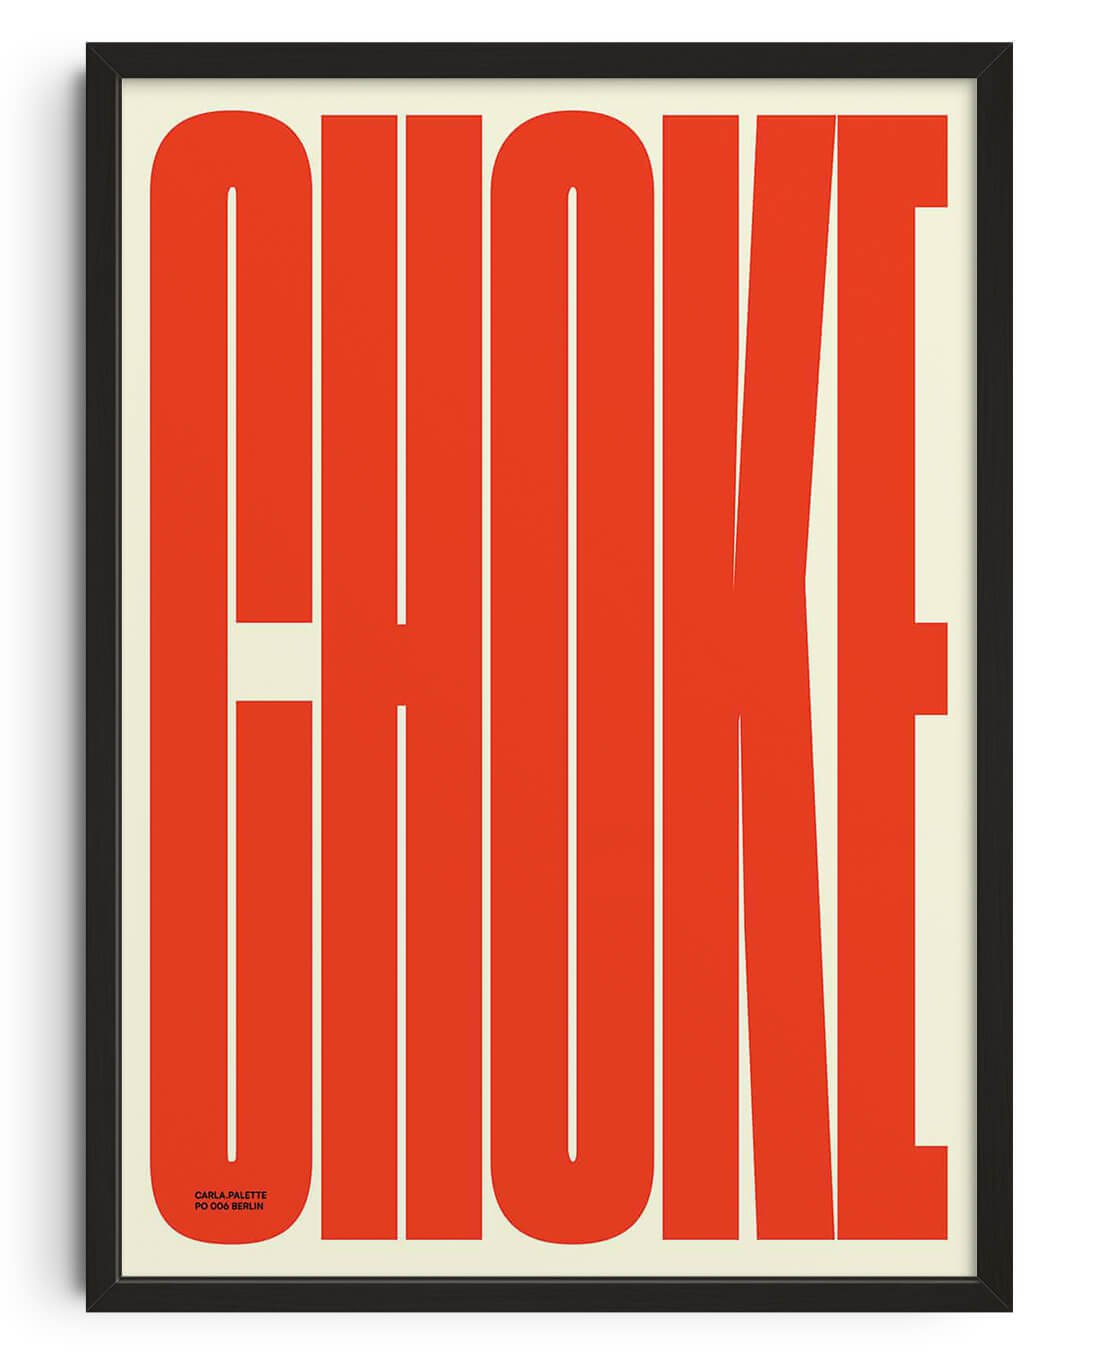 11.7x16.5" (A3) CHOKE - UNFRAMED contemporary wall art print by Carla Palette - sold by DROOL